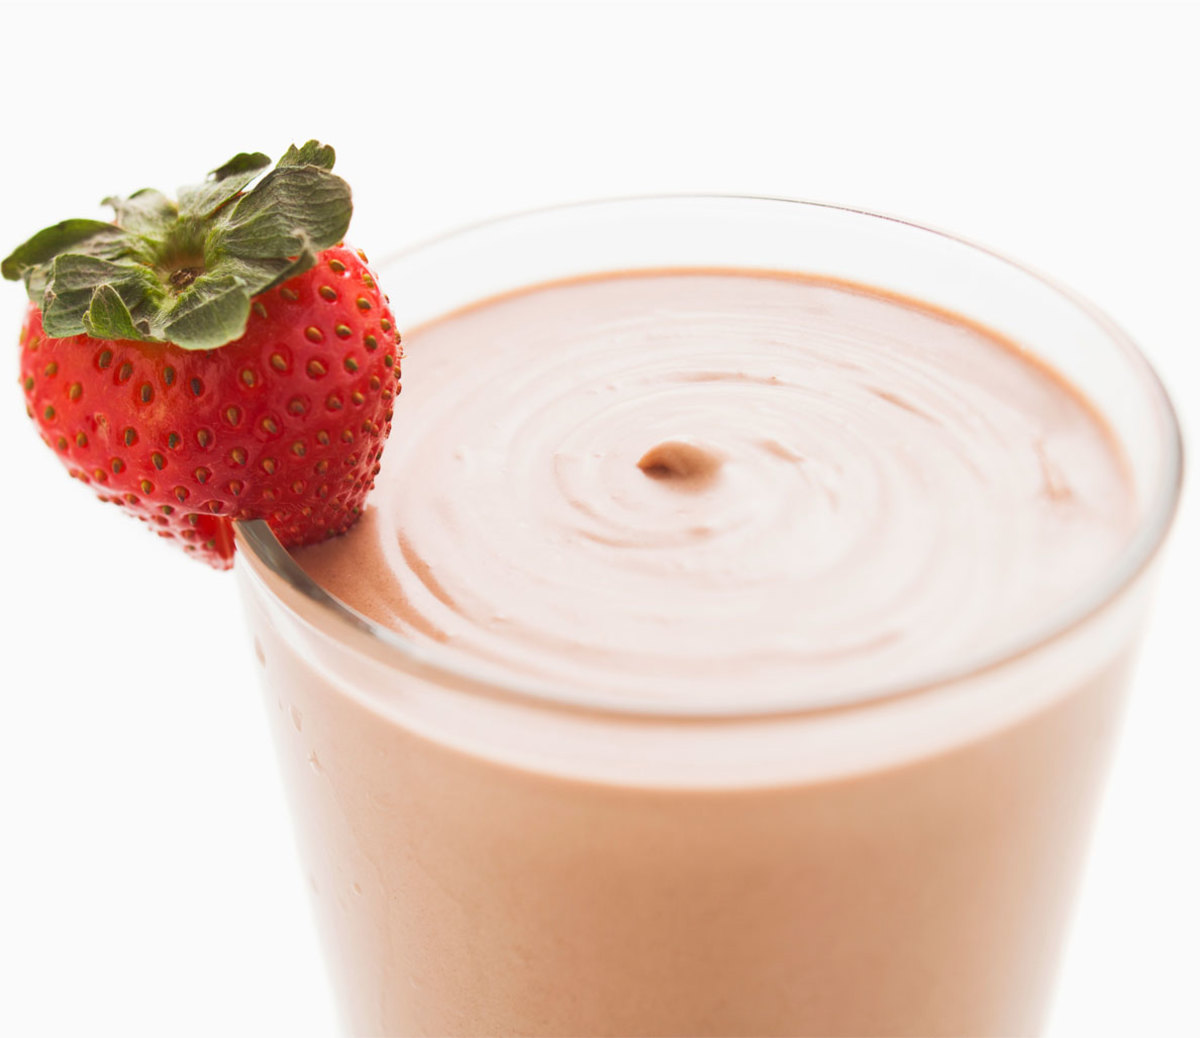 The Ultimate Peanut Butter & Jelly Smoothie - Men's Journal